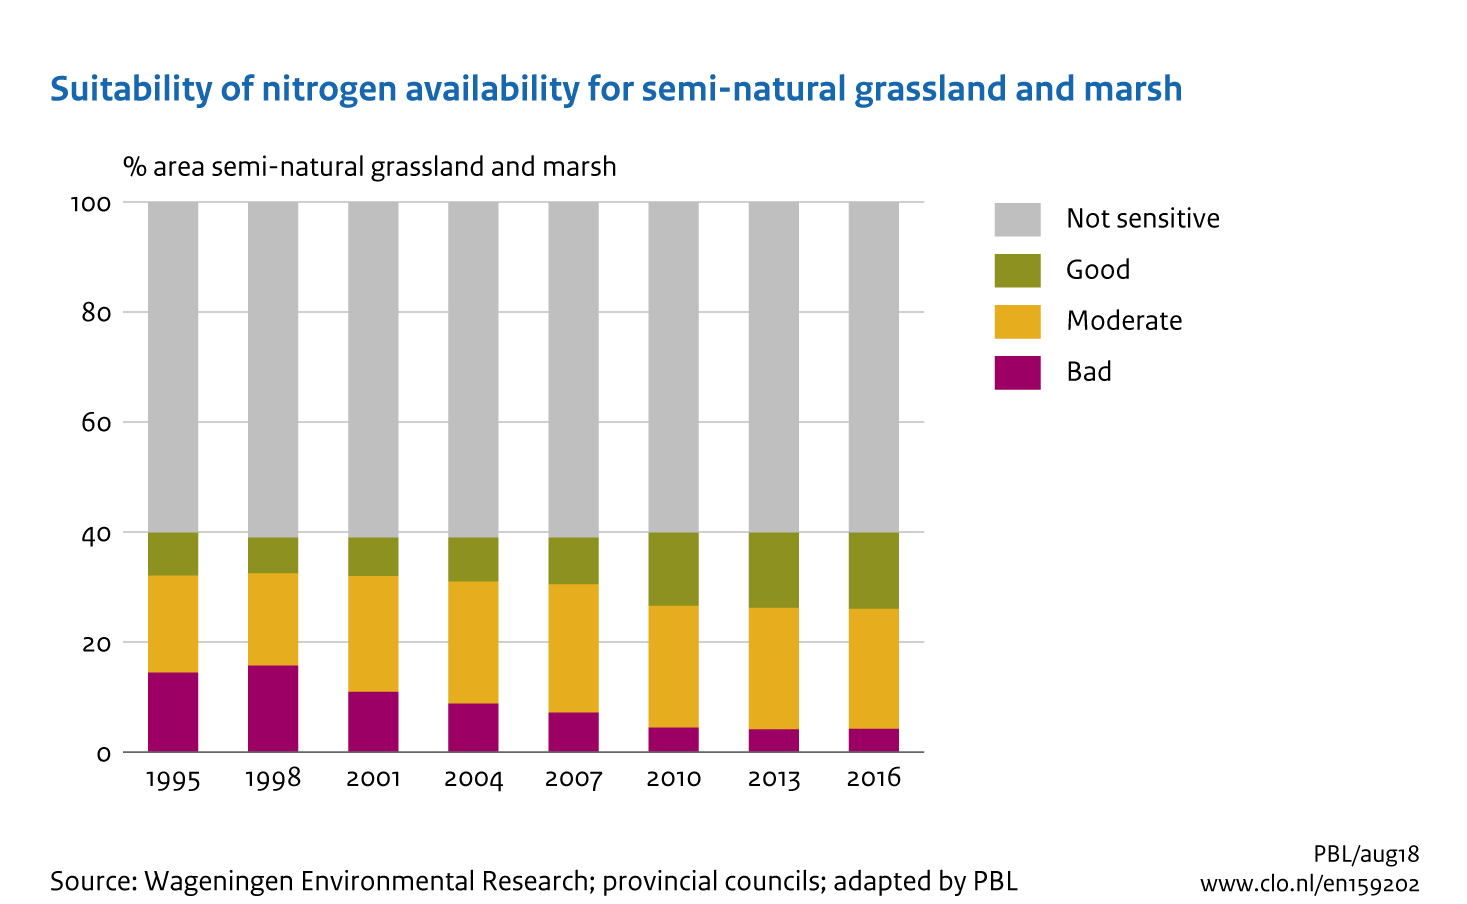 Image  Suitability of nitrogen availability for semi-natural grassland and marsh. The image is further explained in the text.